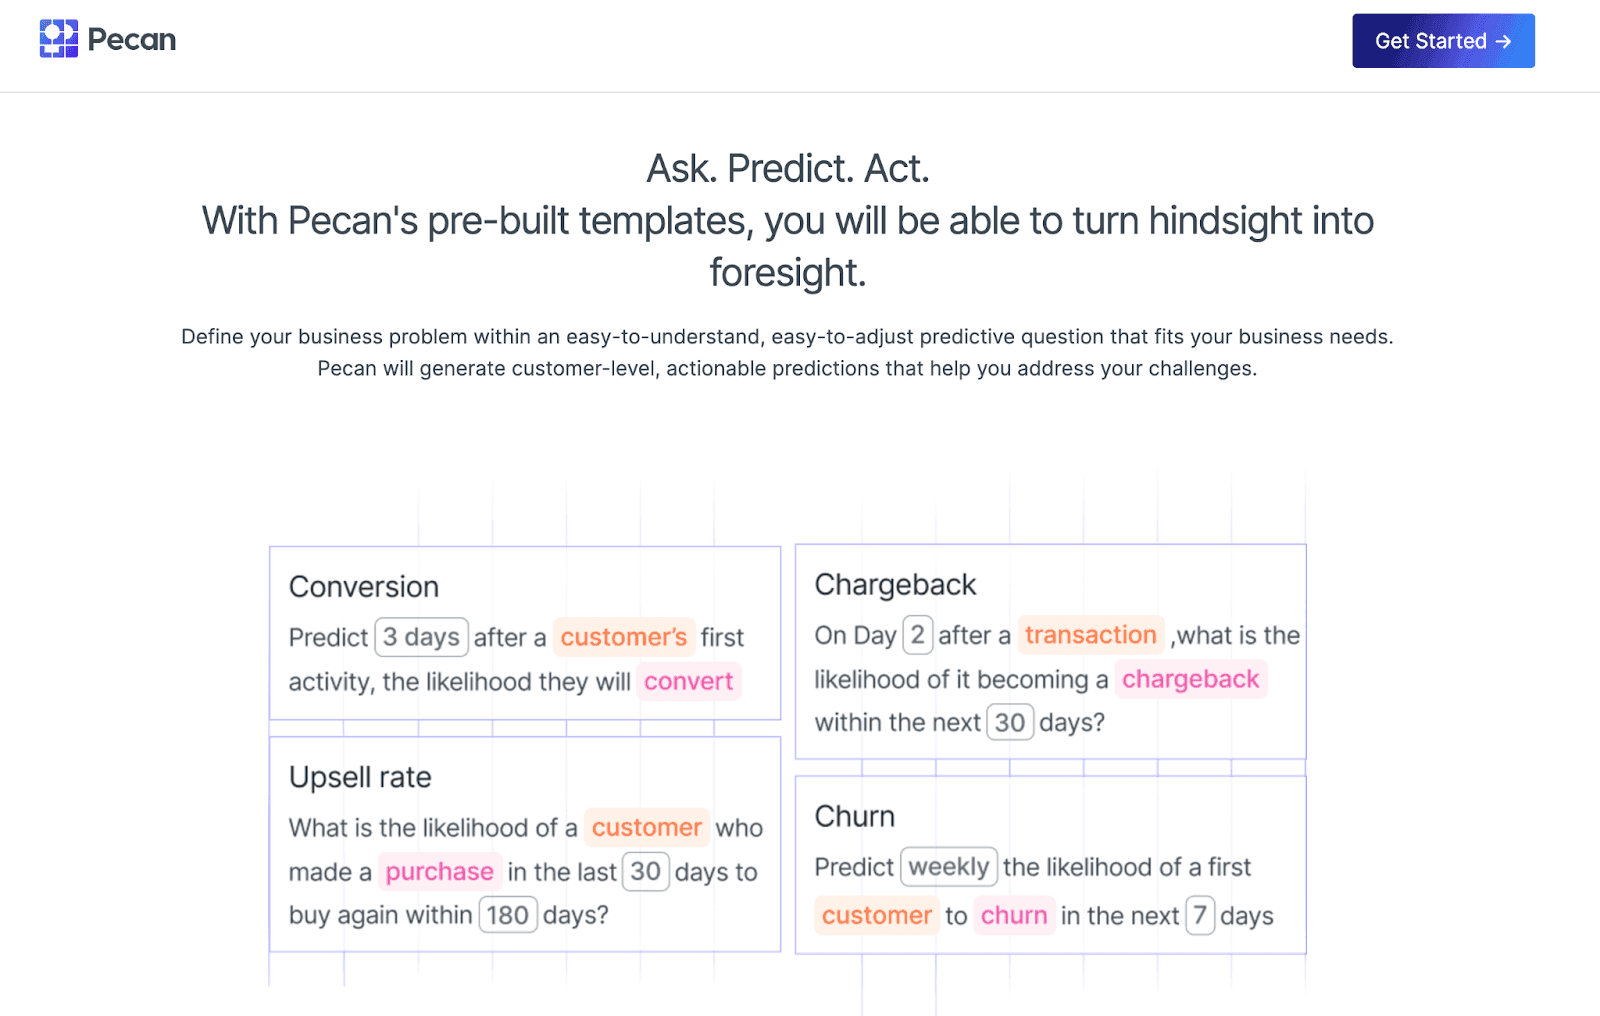 Pecan AI - Ask. Predict. Act. With Pecan's pre-built templates, you will be able to turn hindsight into foresight